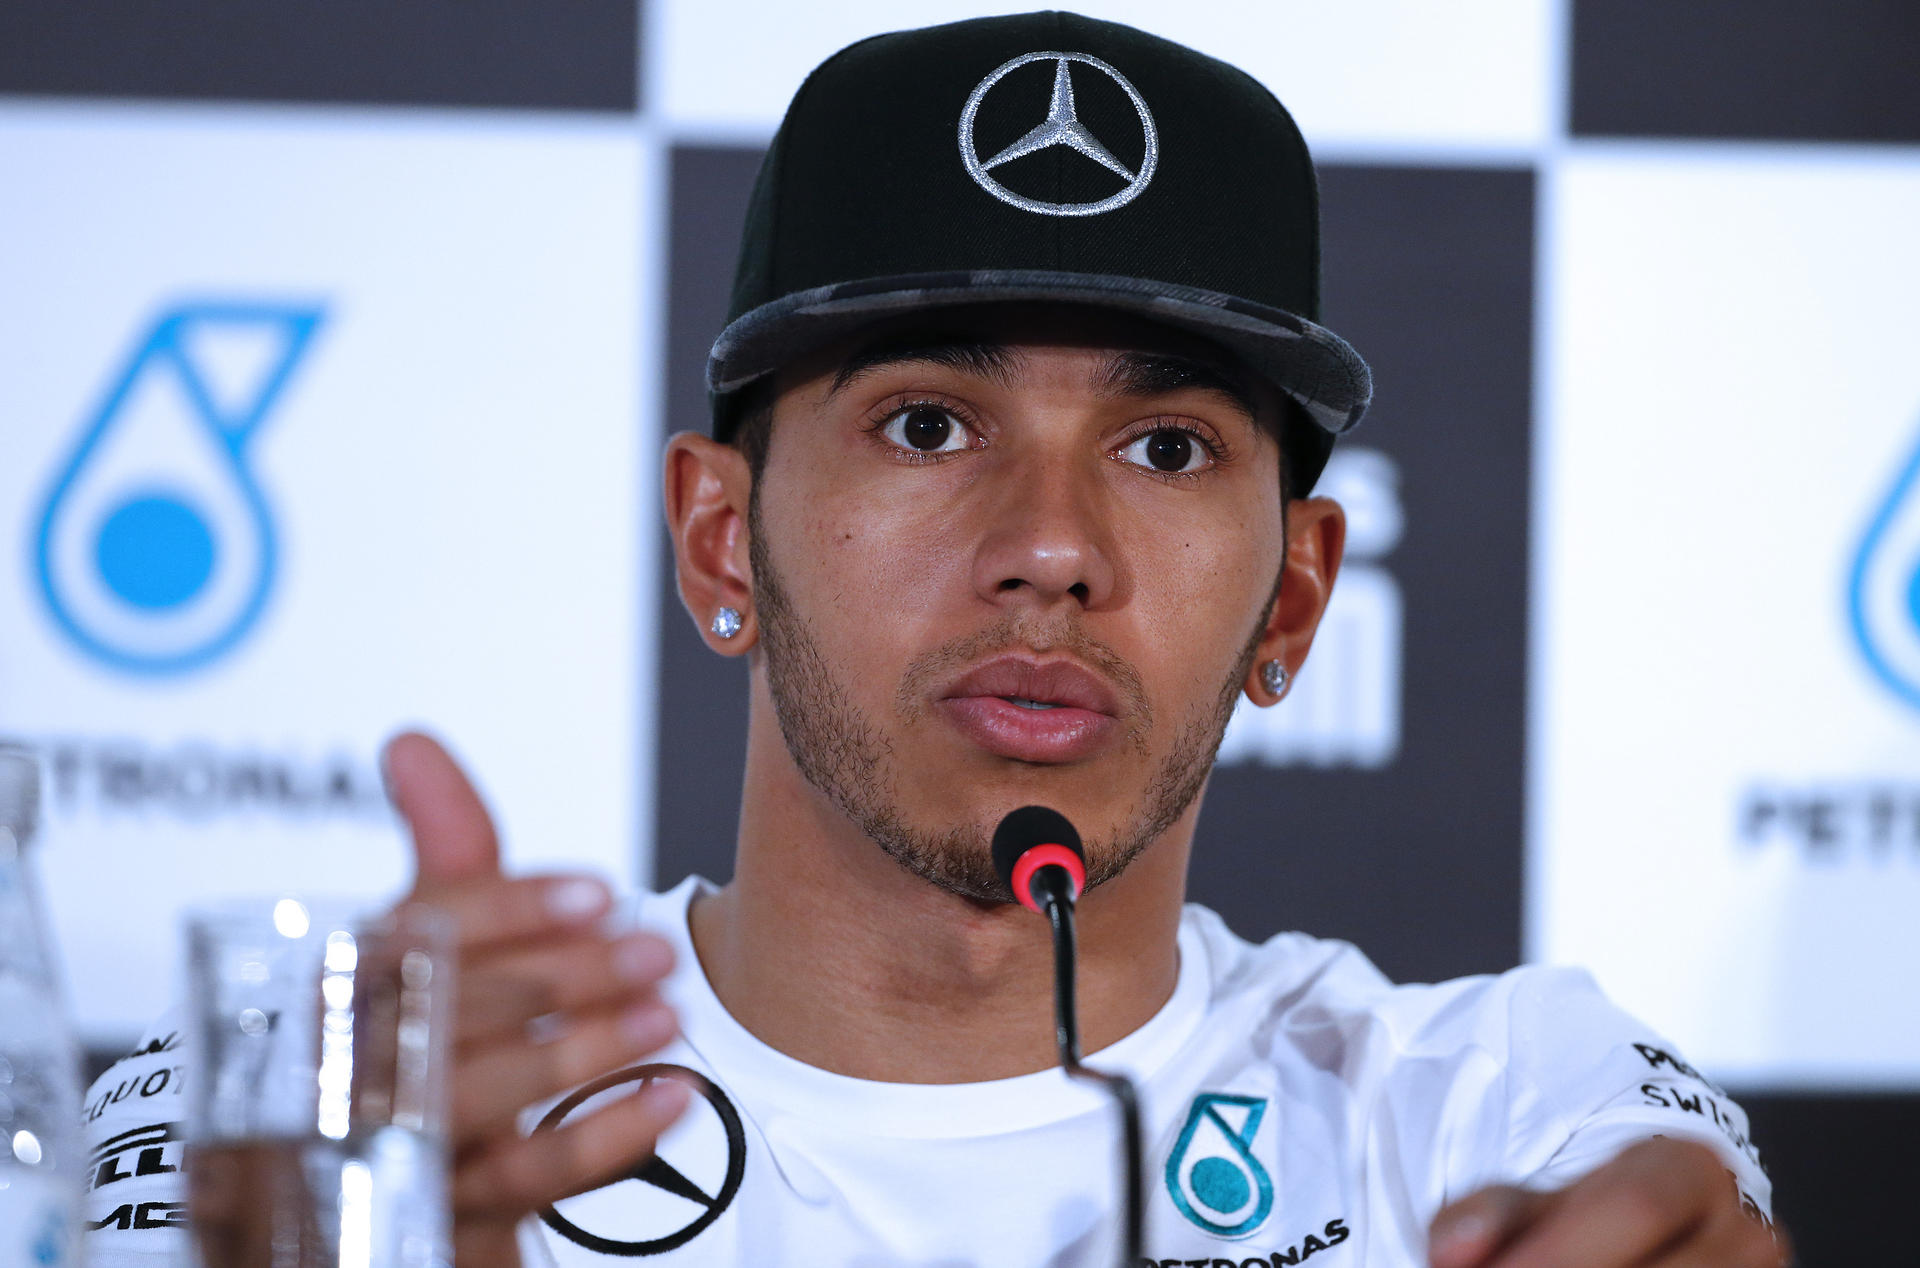 Lewis Hamilton says he will keep his head down and just keep chipping away in the race for the F1 championship. Photos: AP